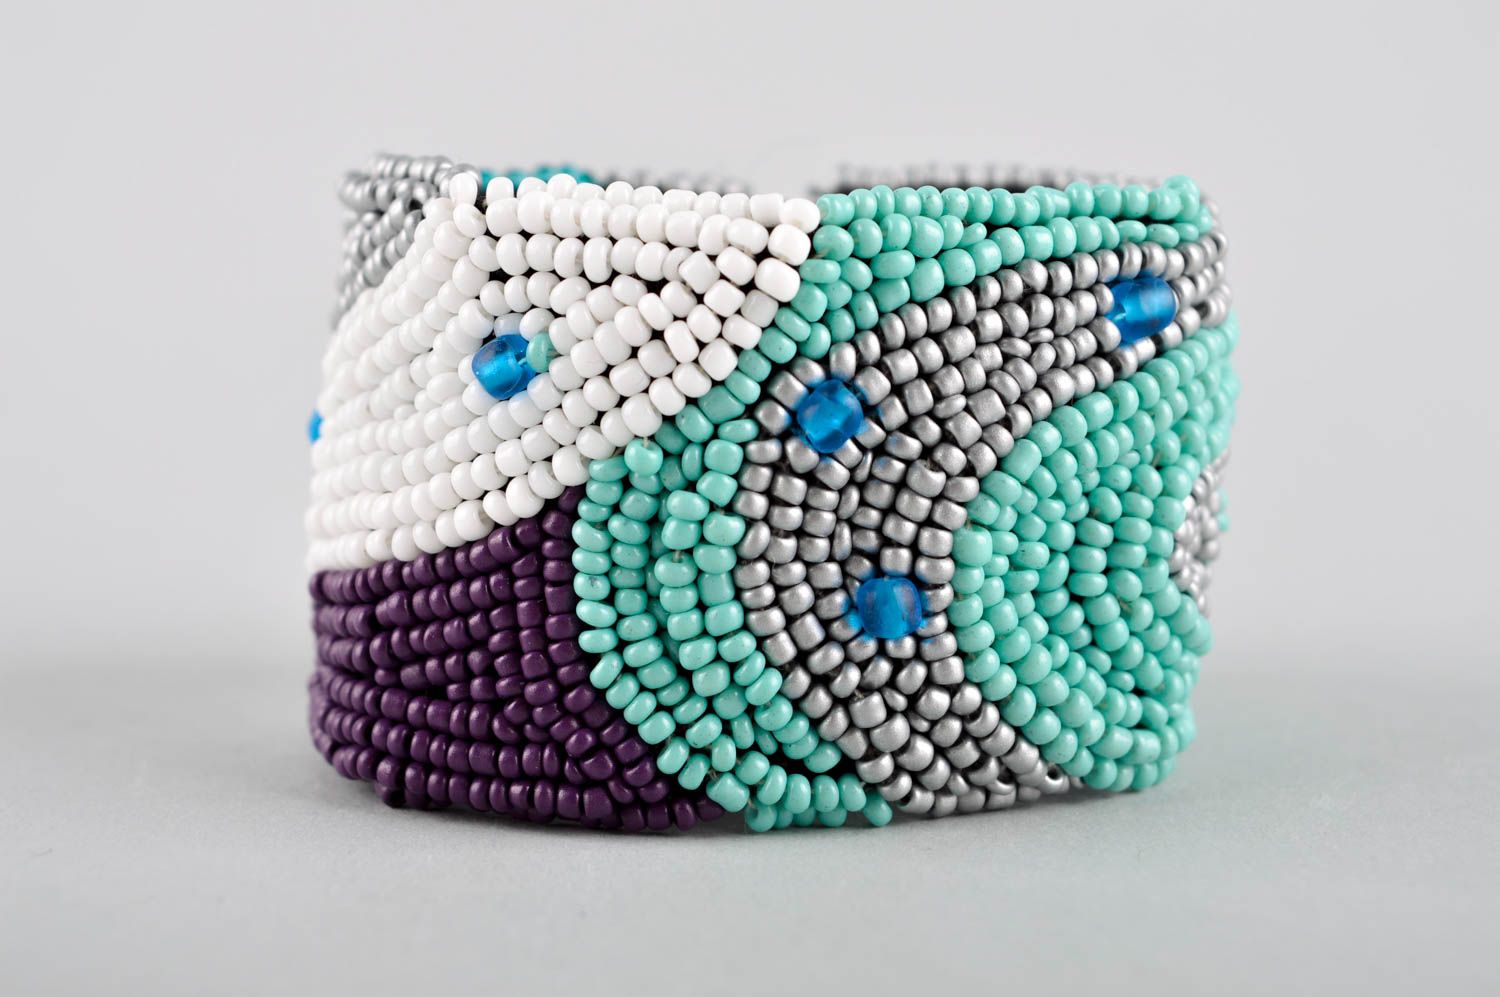 Stylish handmade beaded wide wrist bracelet in turquoise, white and black colors photo 3